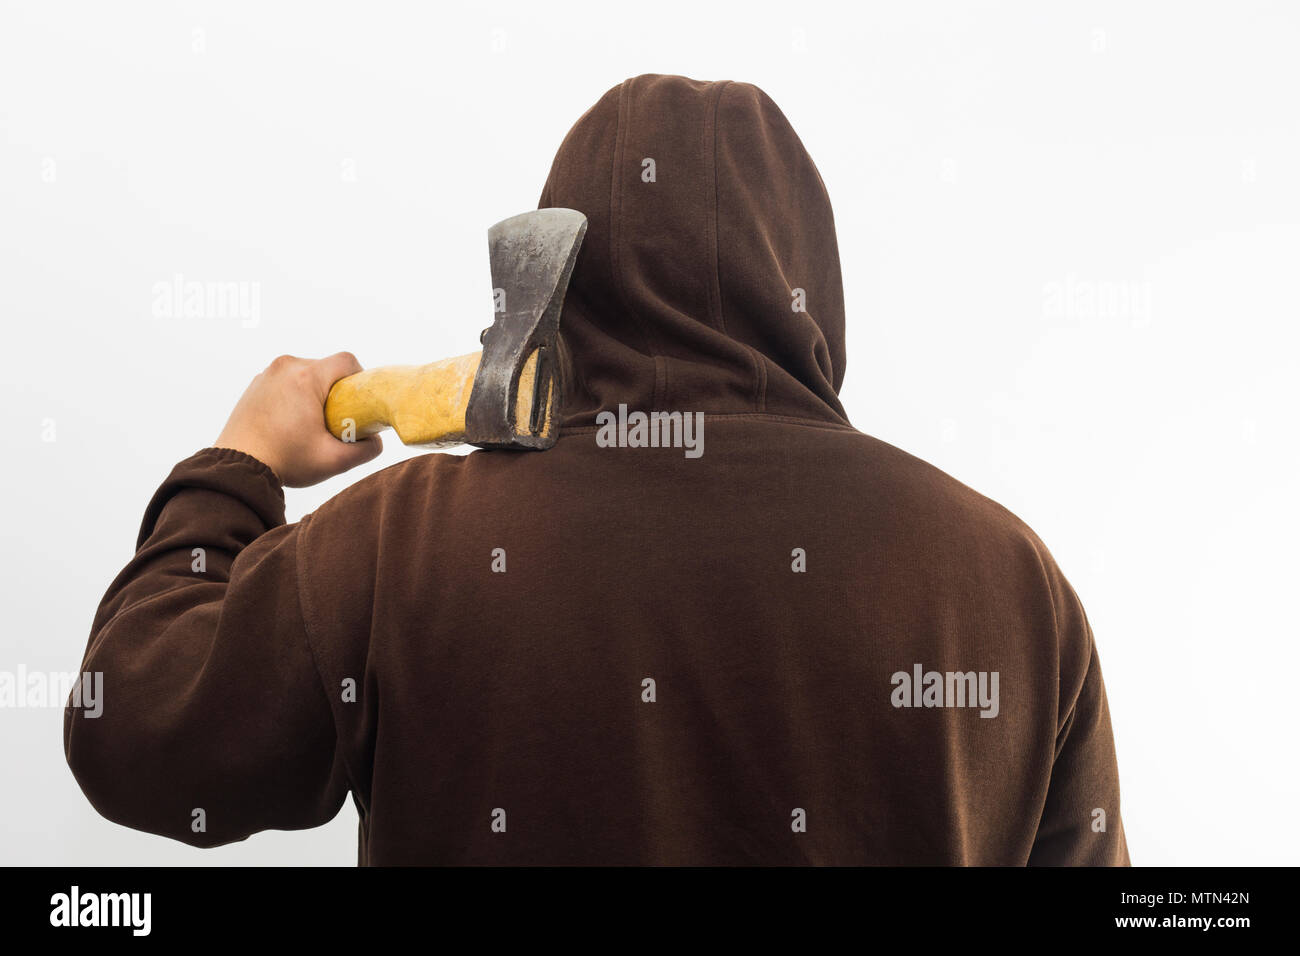 man with ax on his back on white background Stock Photo